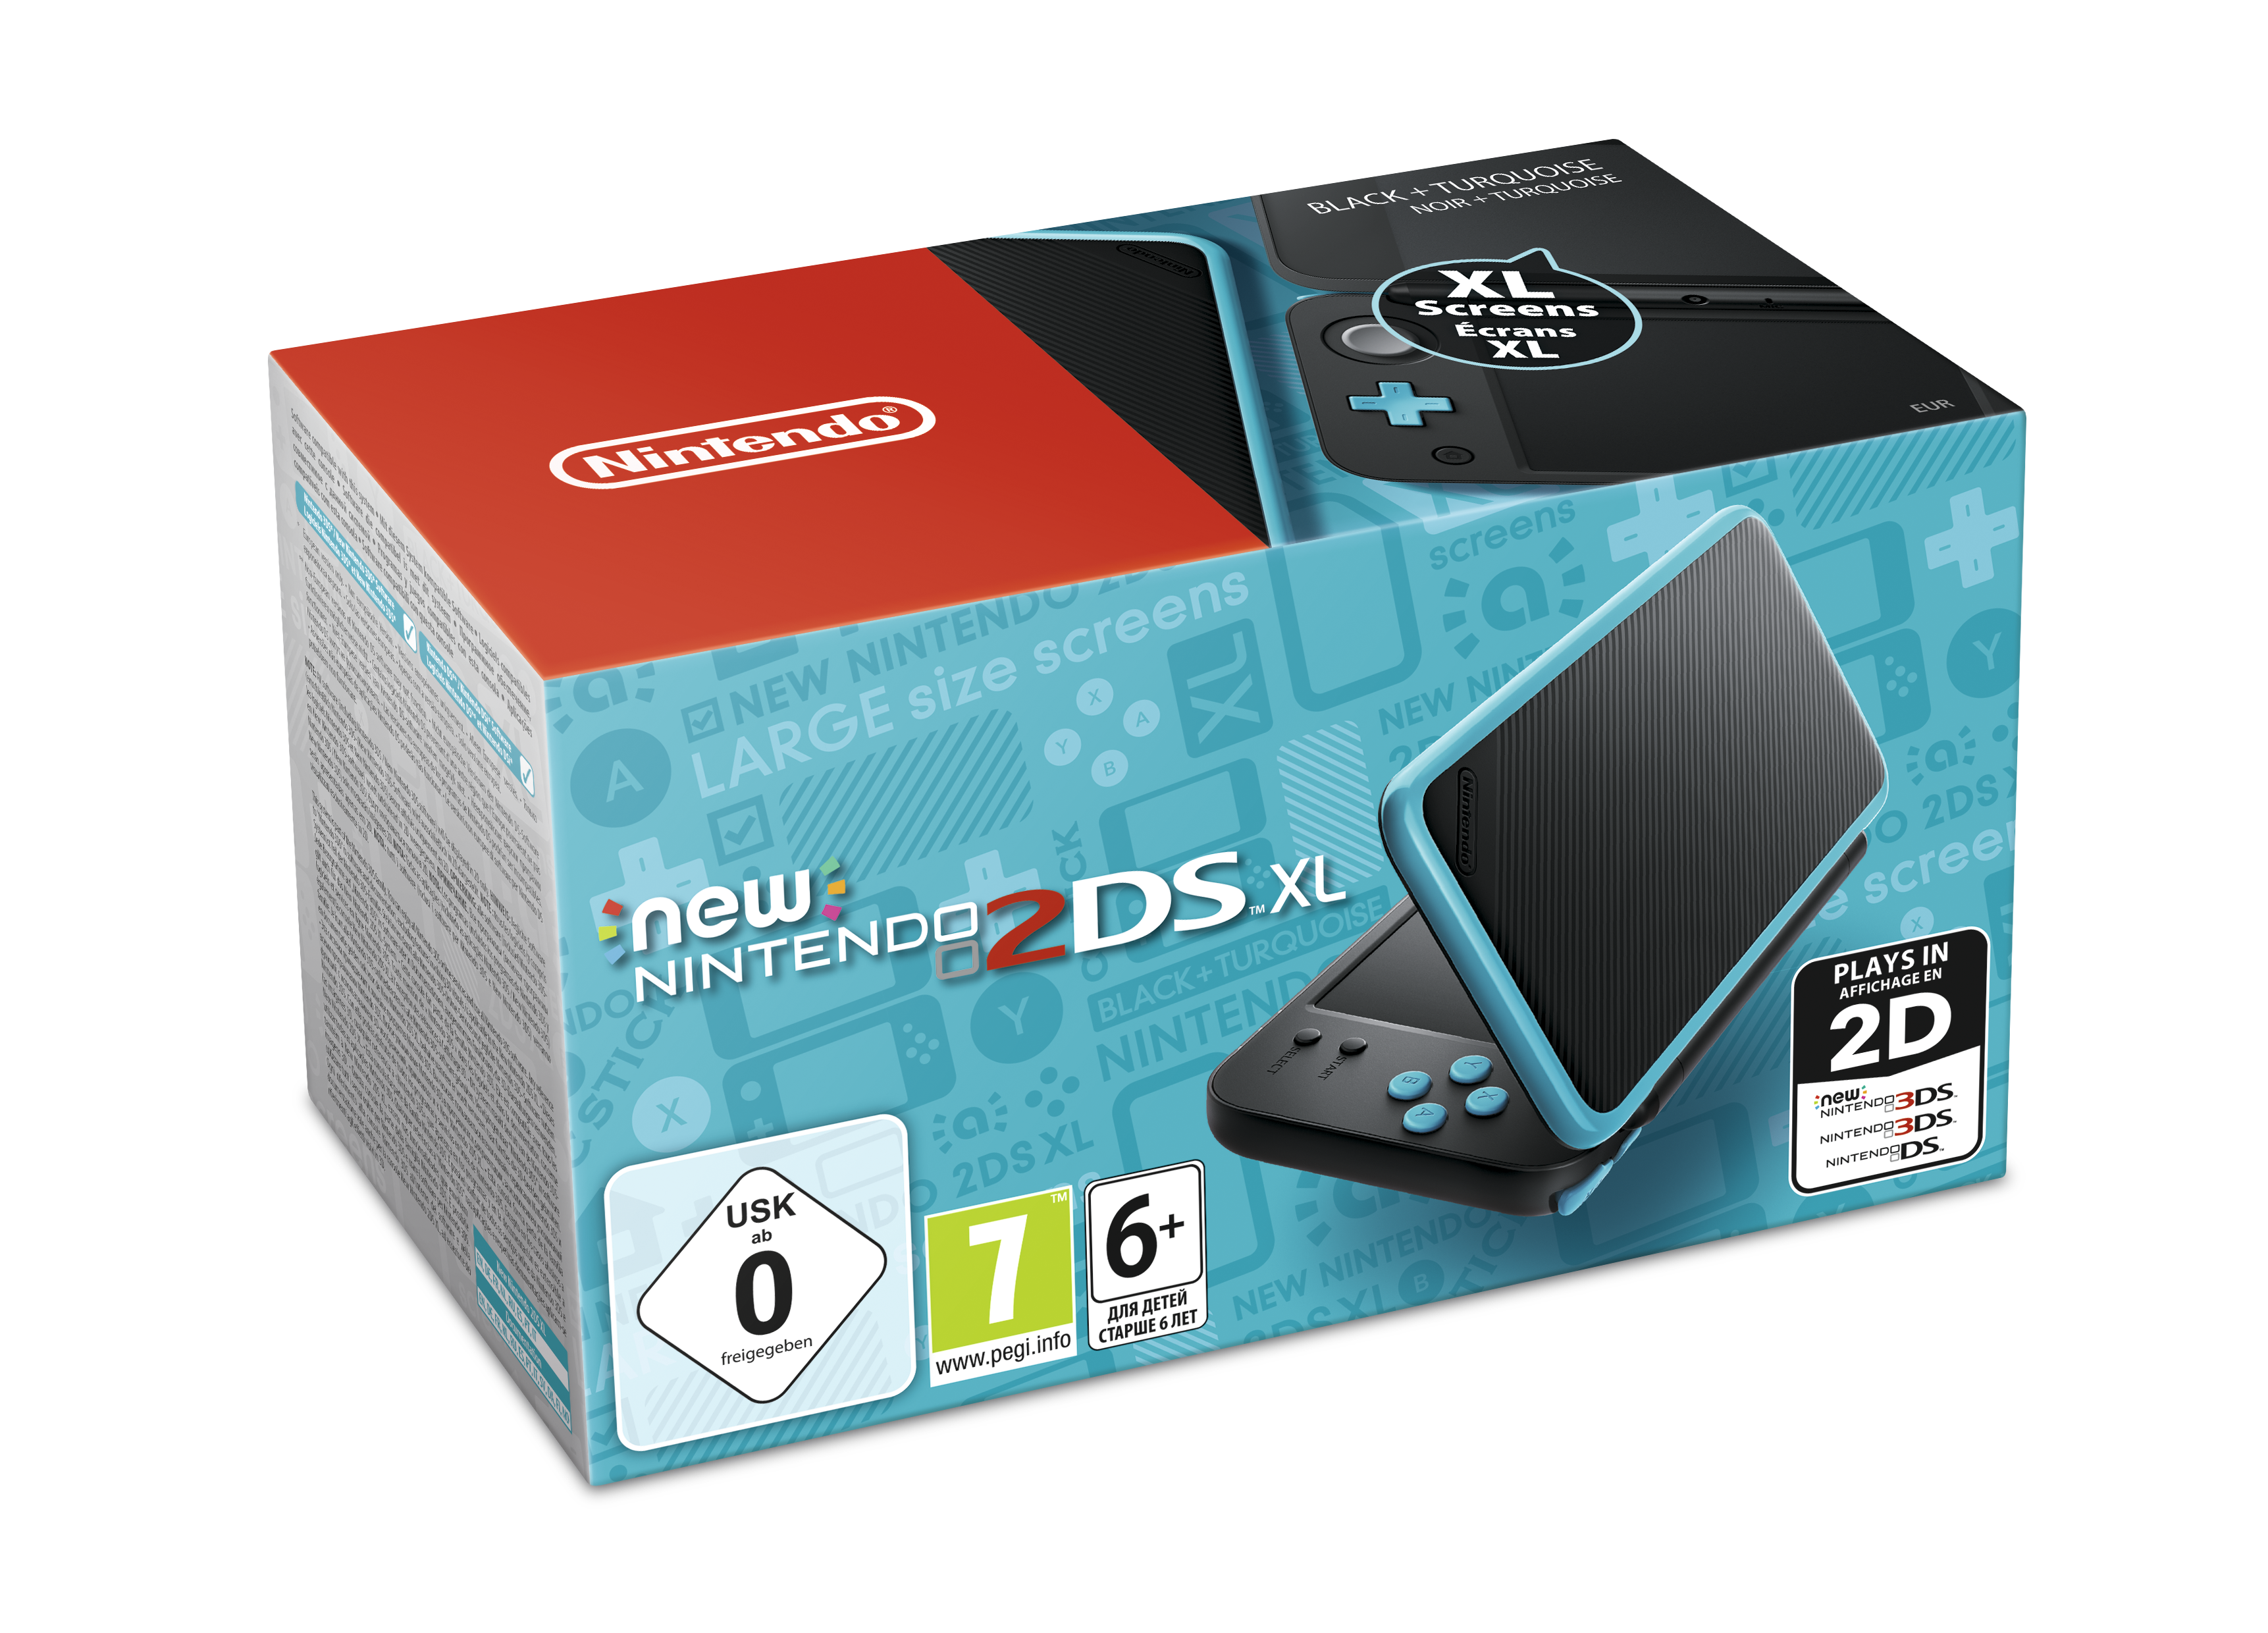 nintendo 2ds blue and black